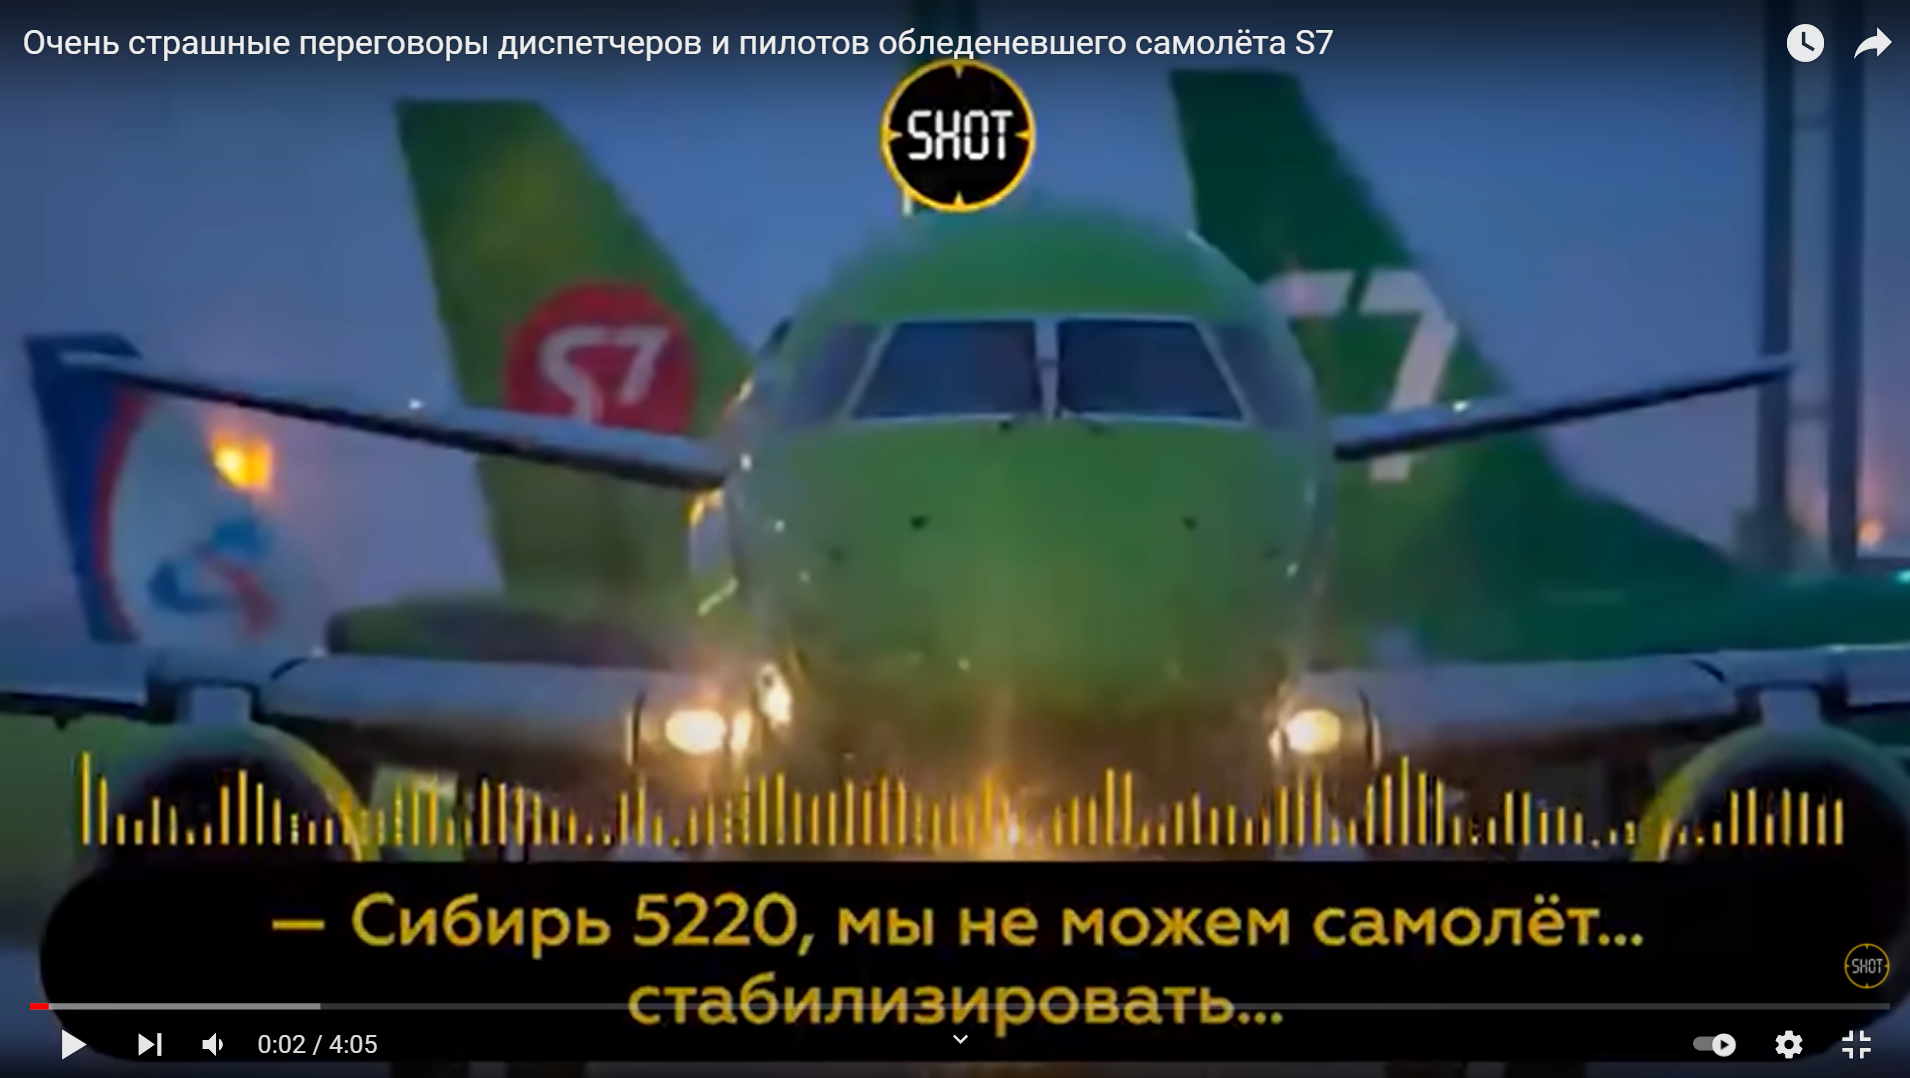 An S7 plane with 200 passengers on board nearly crashed in Magadan: who is to blame?